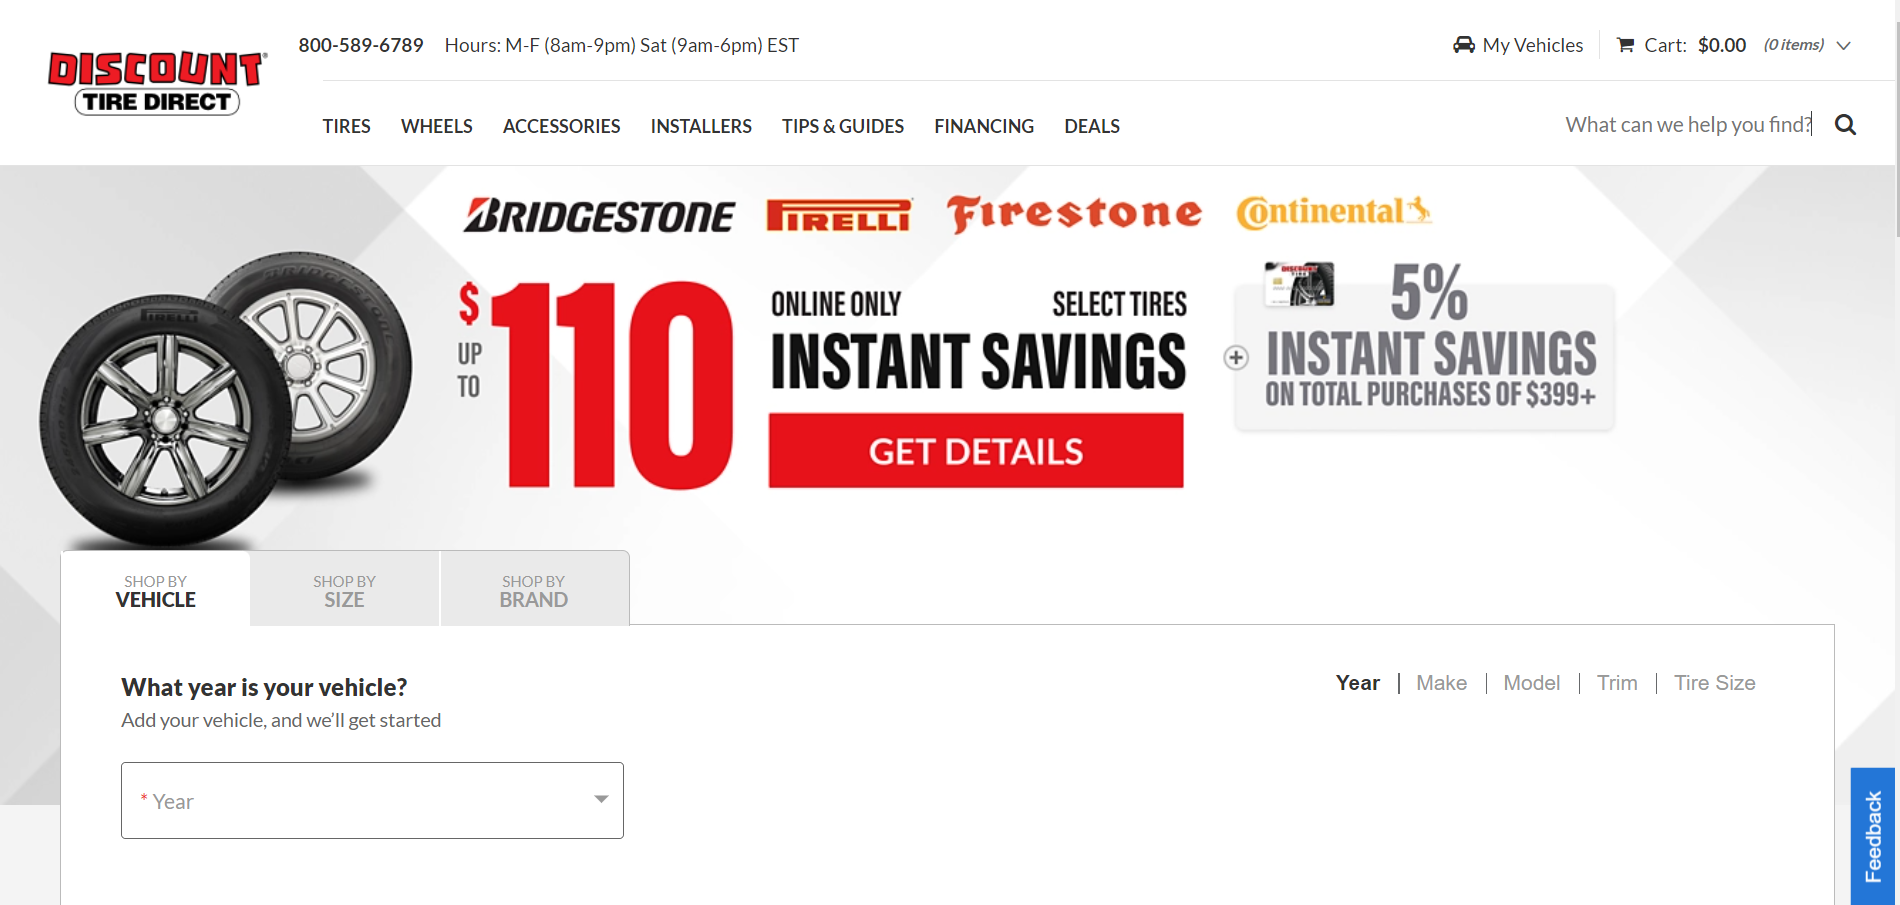 Discount Tire Direct 